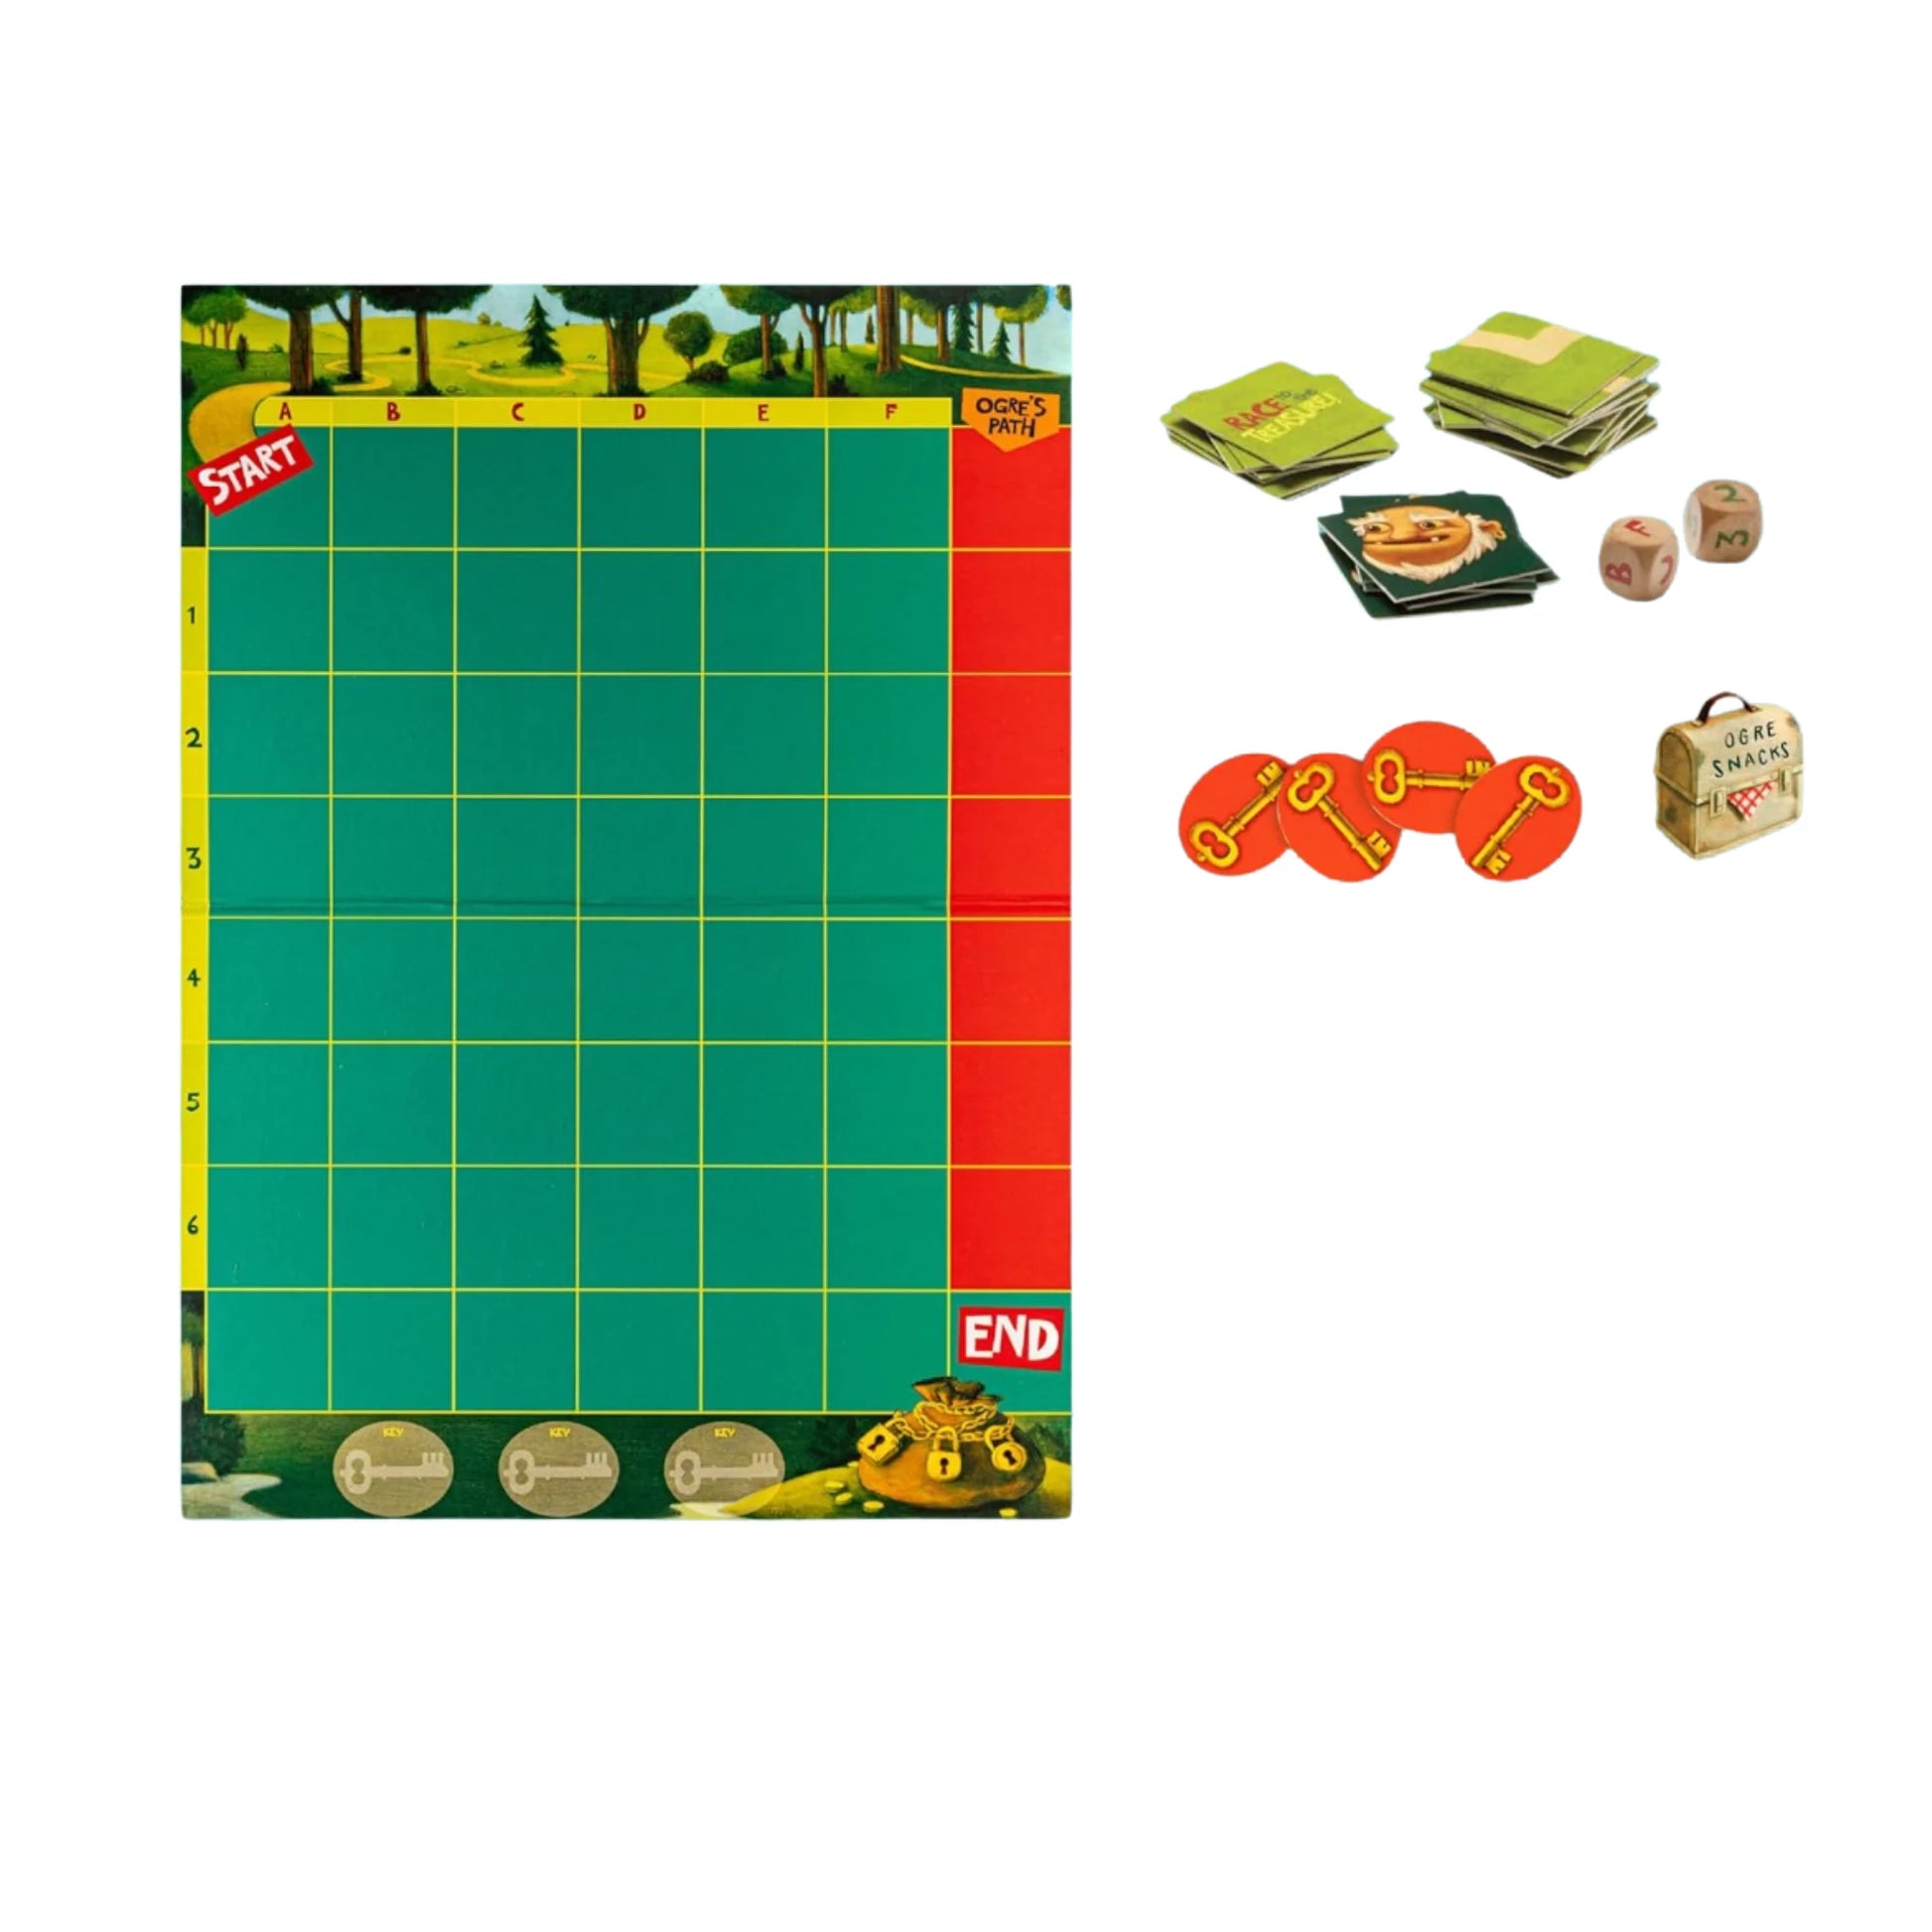 Board Game for Kids Race to the Treasure by Peaceable Kingdom - Alder & Alouette